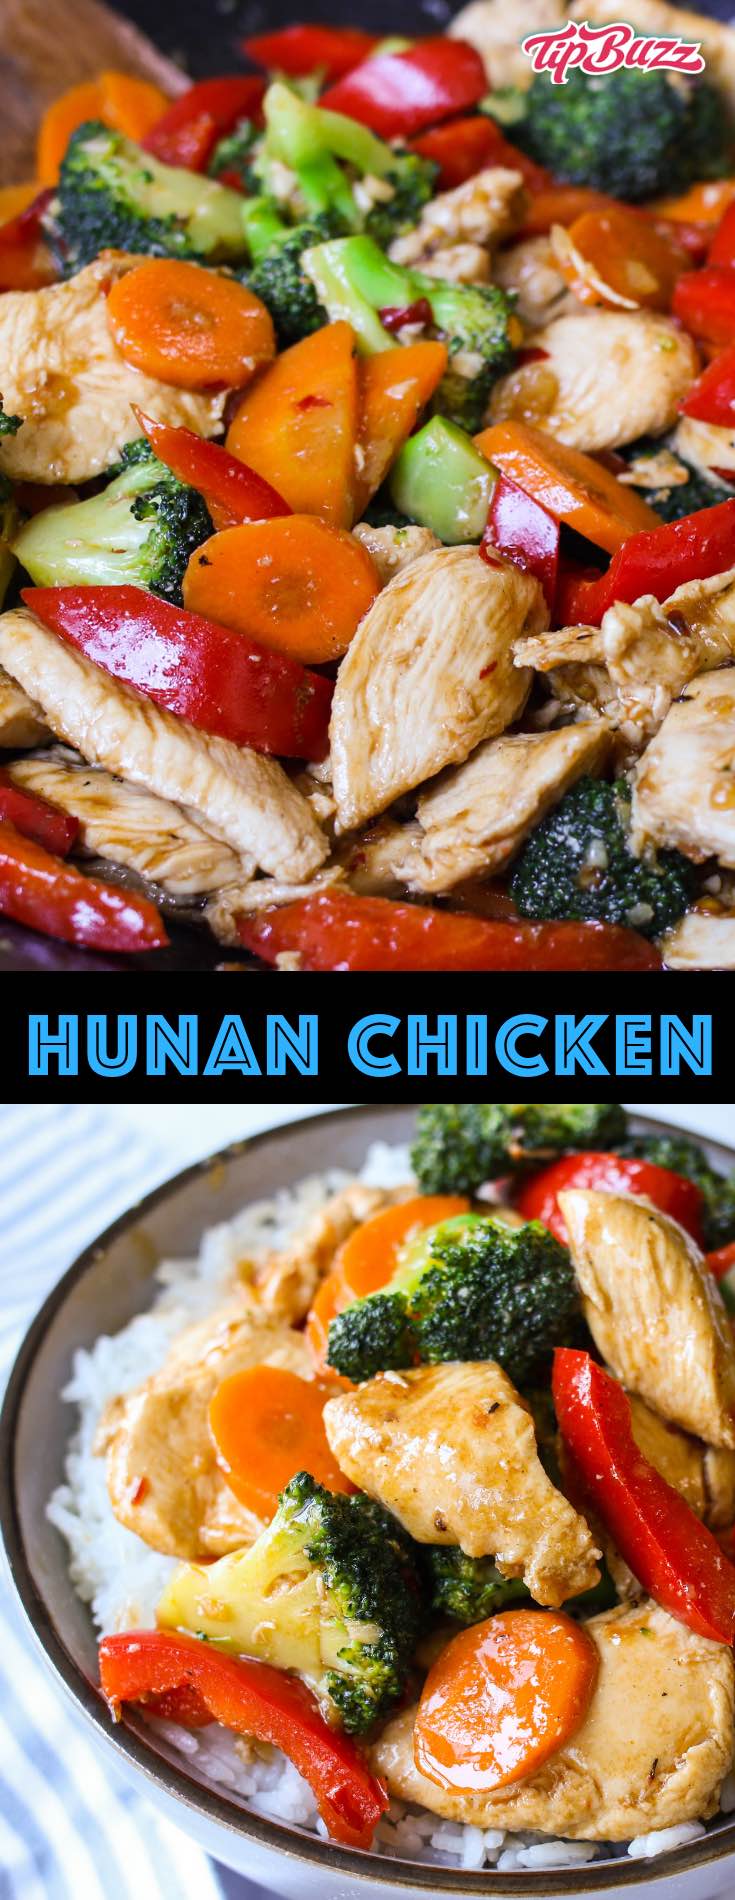 pictures of hunan chicken